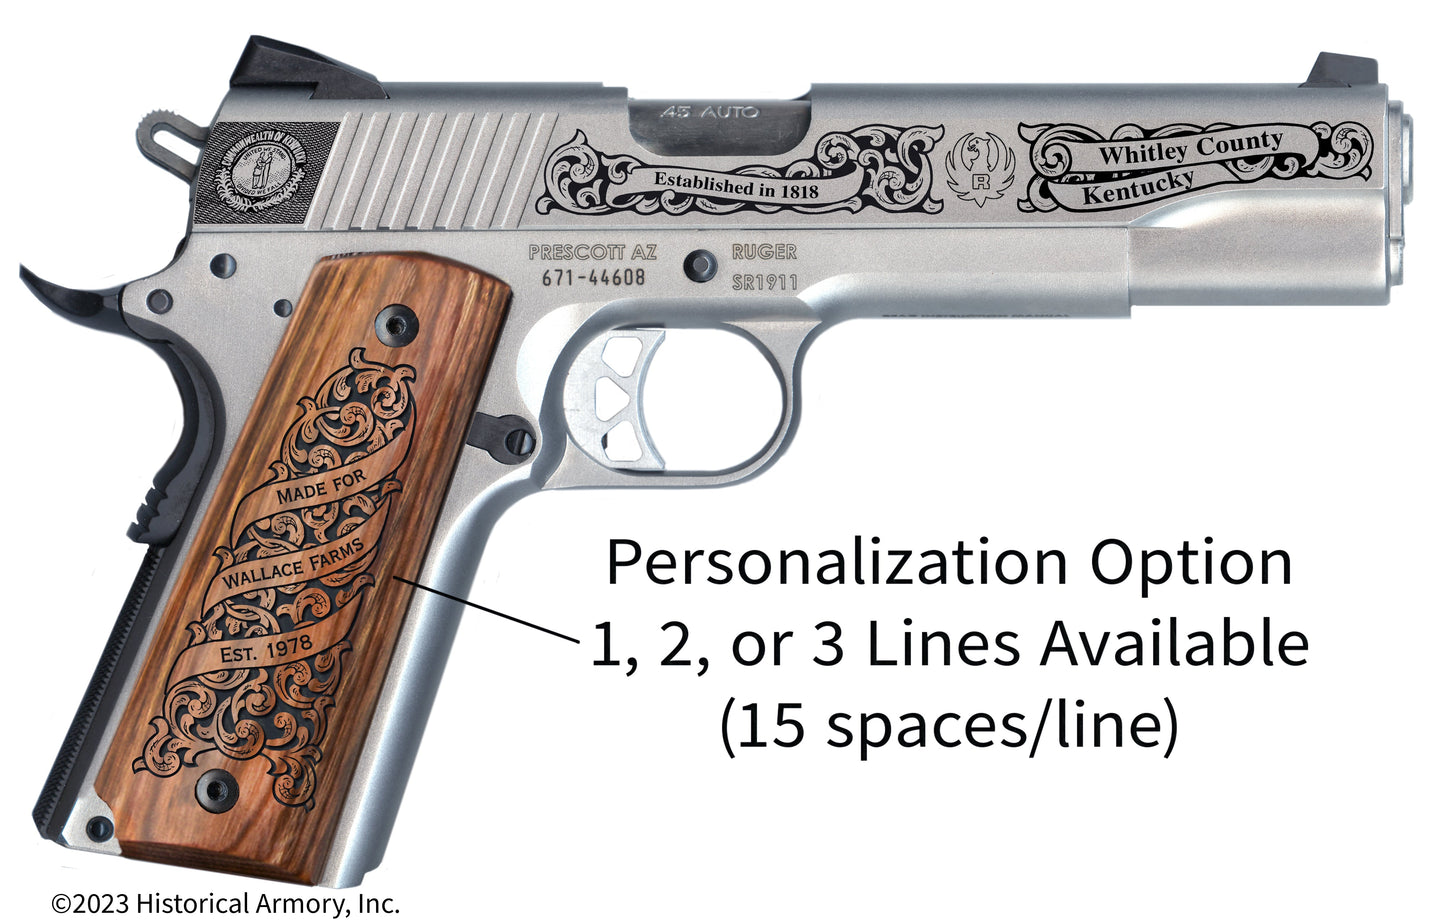 Whitley County Kentucky Personalized Engraved .45 Auto Ruger 1911